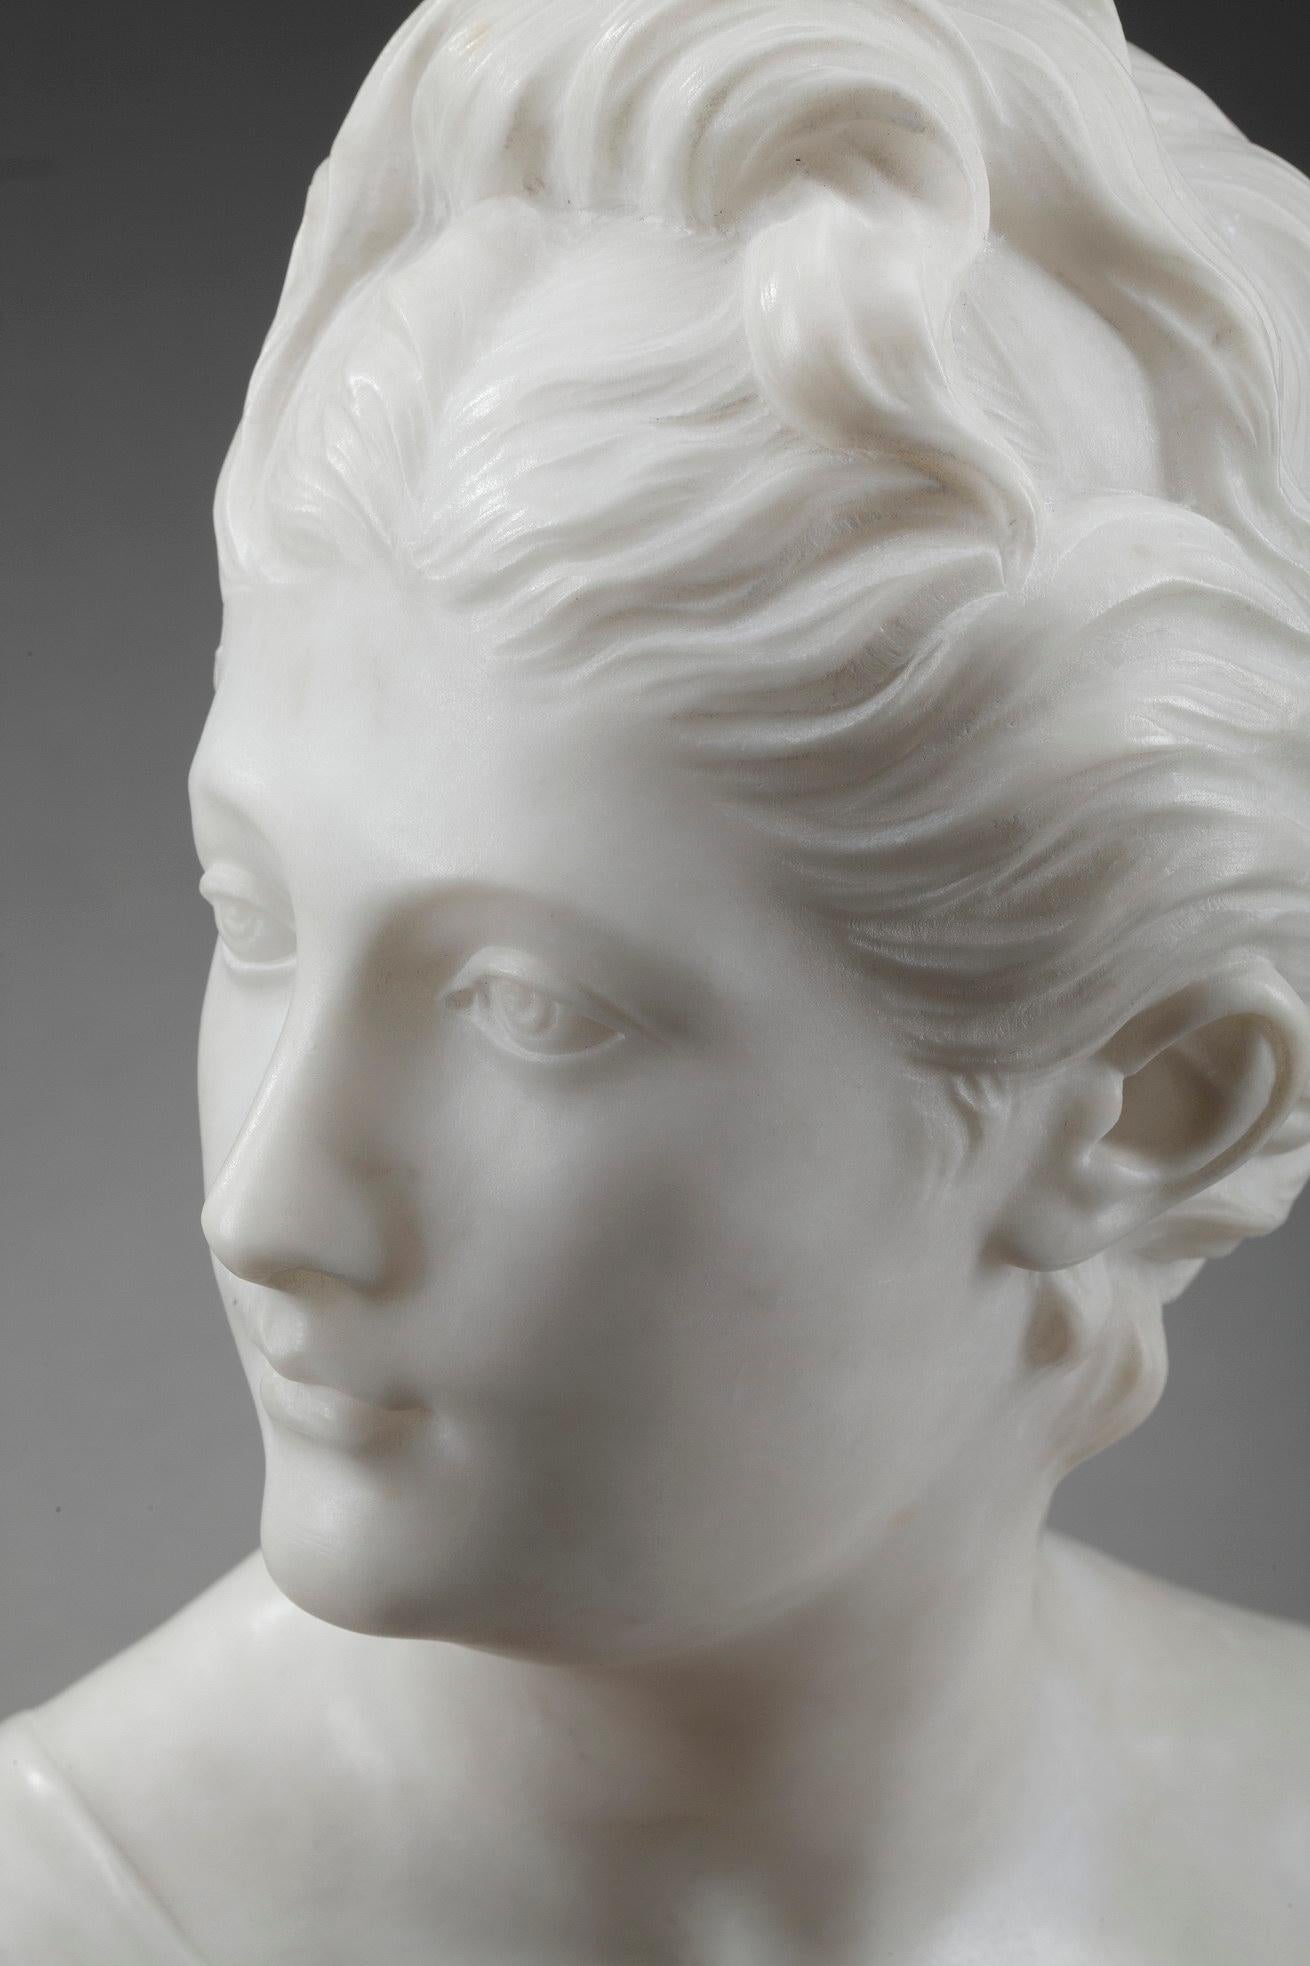 Late 19th century mythological bust crafted of alabaster featuring Diana, wearing a tunic that uncovers her breast. Diana (or Artemis) is commonly depicted as a tall and thin young huntress with her hair tied up and dressed in a tunic. Goddess of